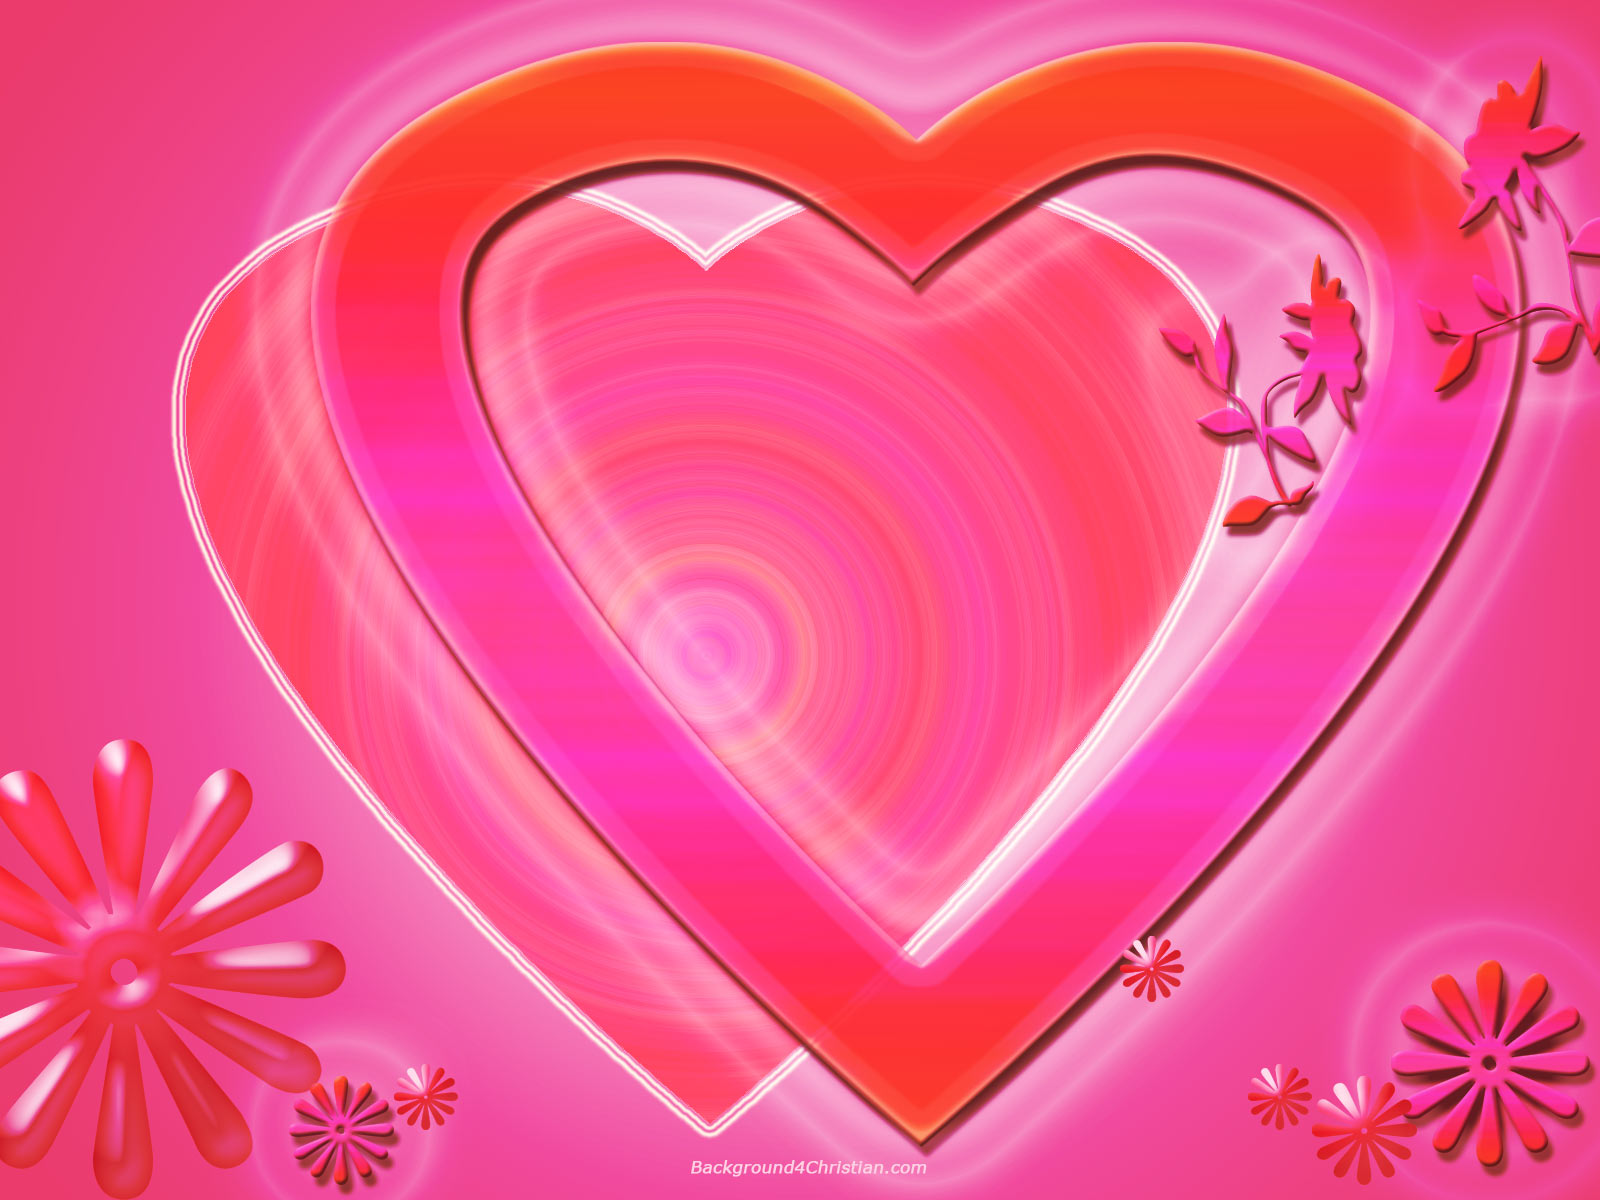 Heart In Pink